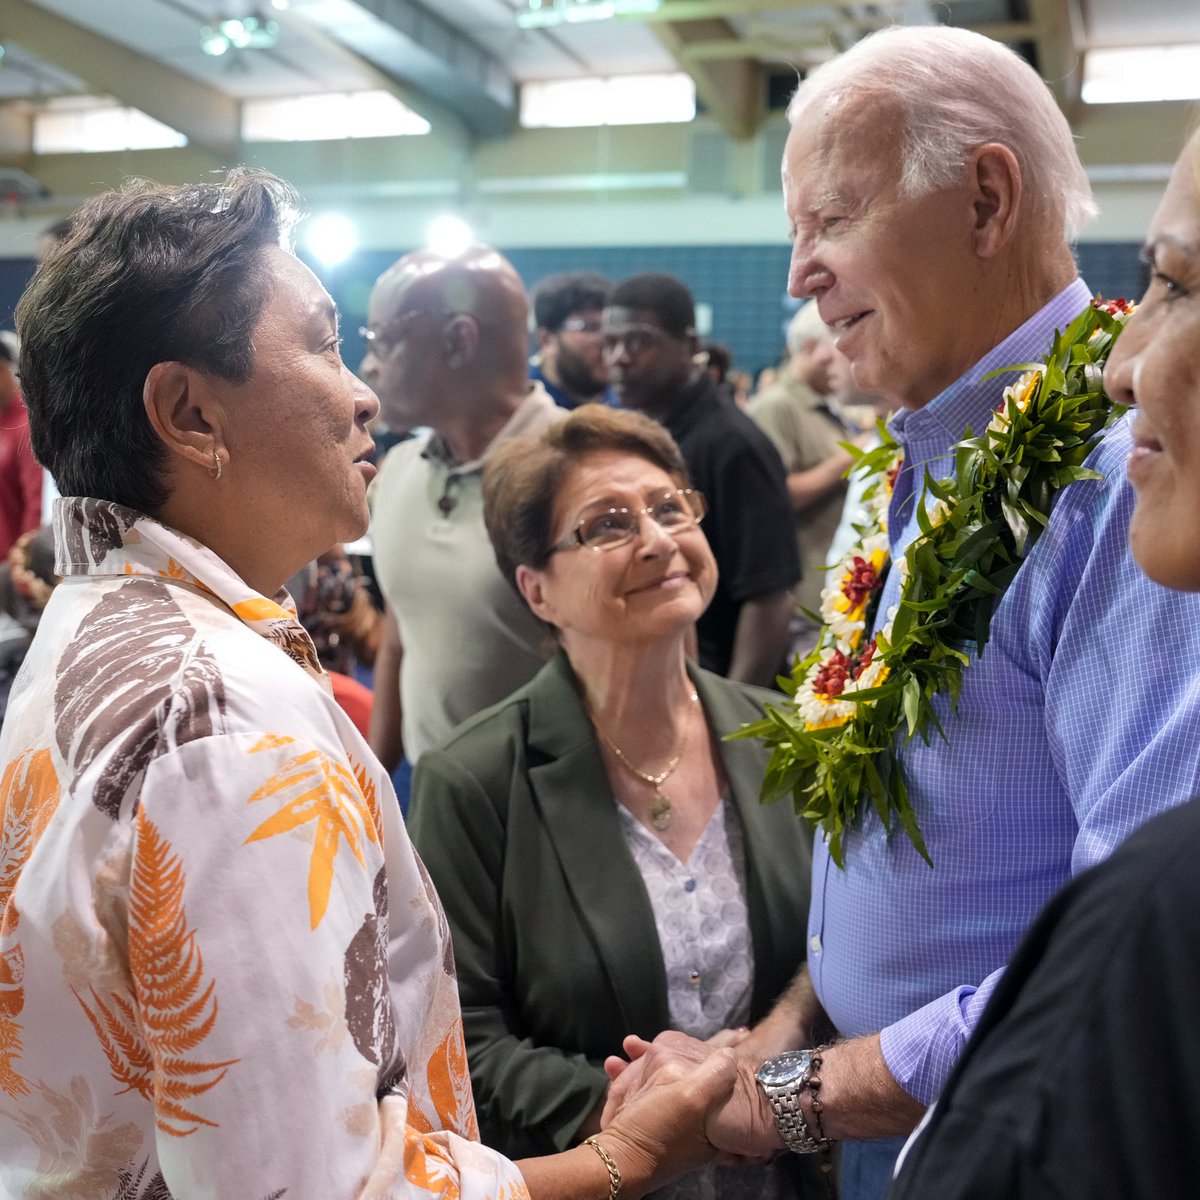 The people of Maui have shown incredible courage. 

The country grieves with you, stands with you, and we’ll do everything possible to help you recover, rebuild, and respect culture and traditions when the rebuilding takes place.